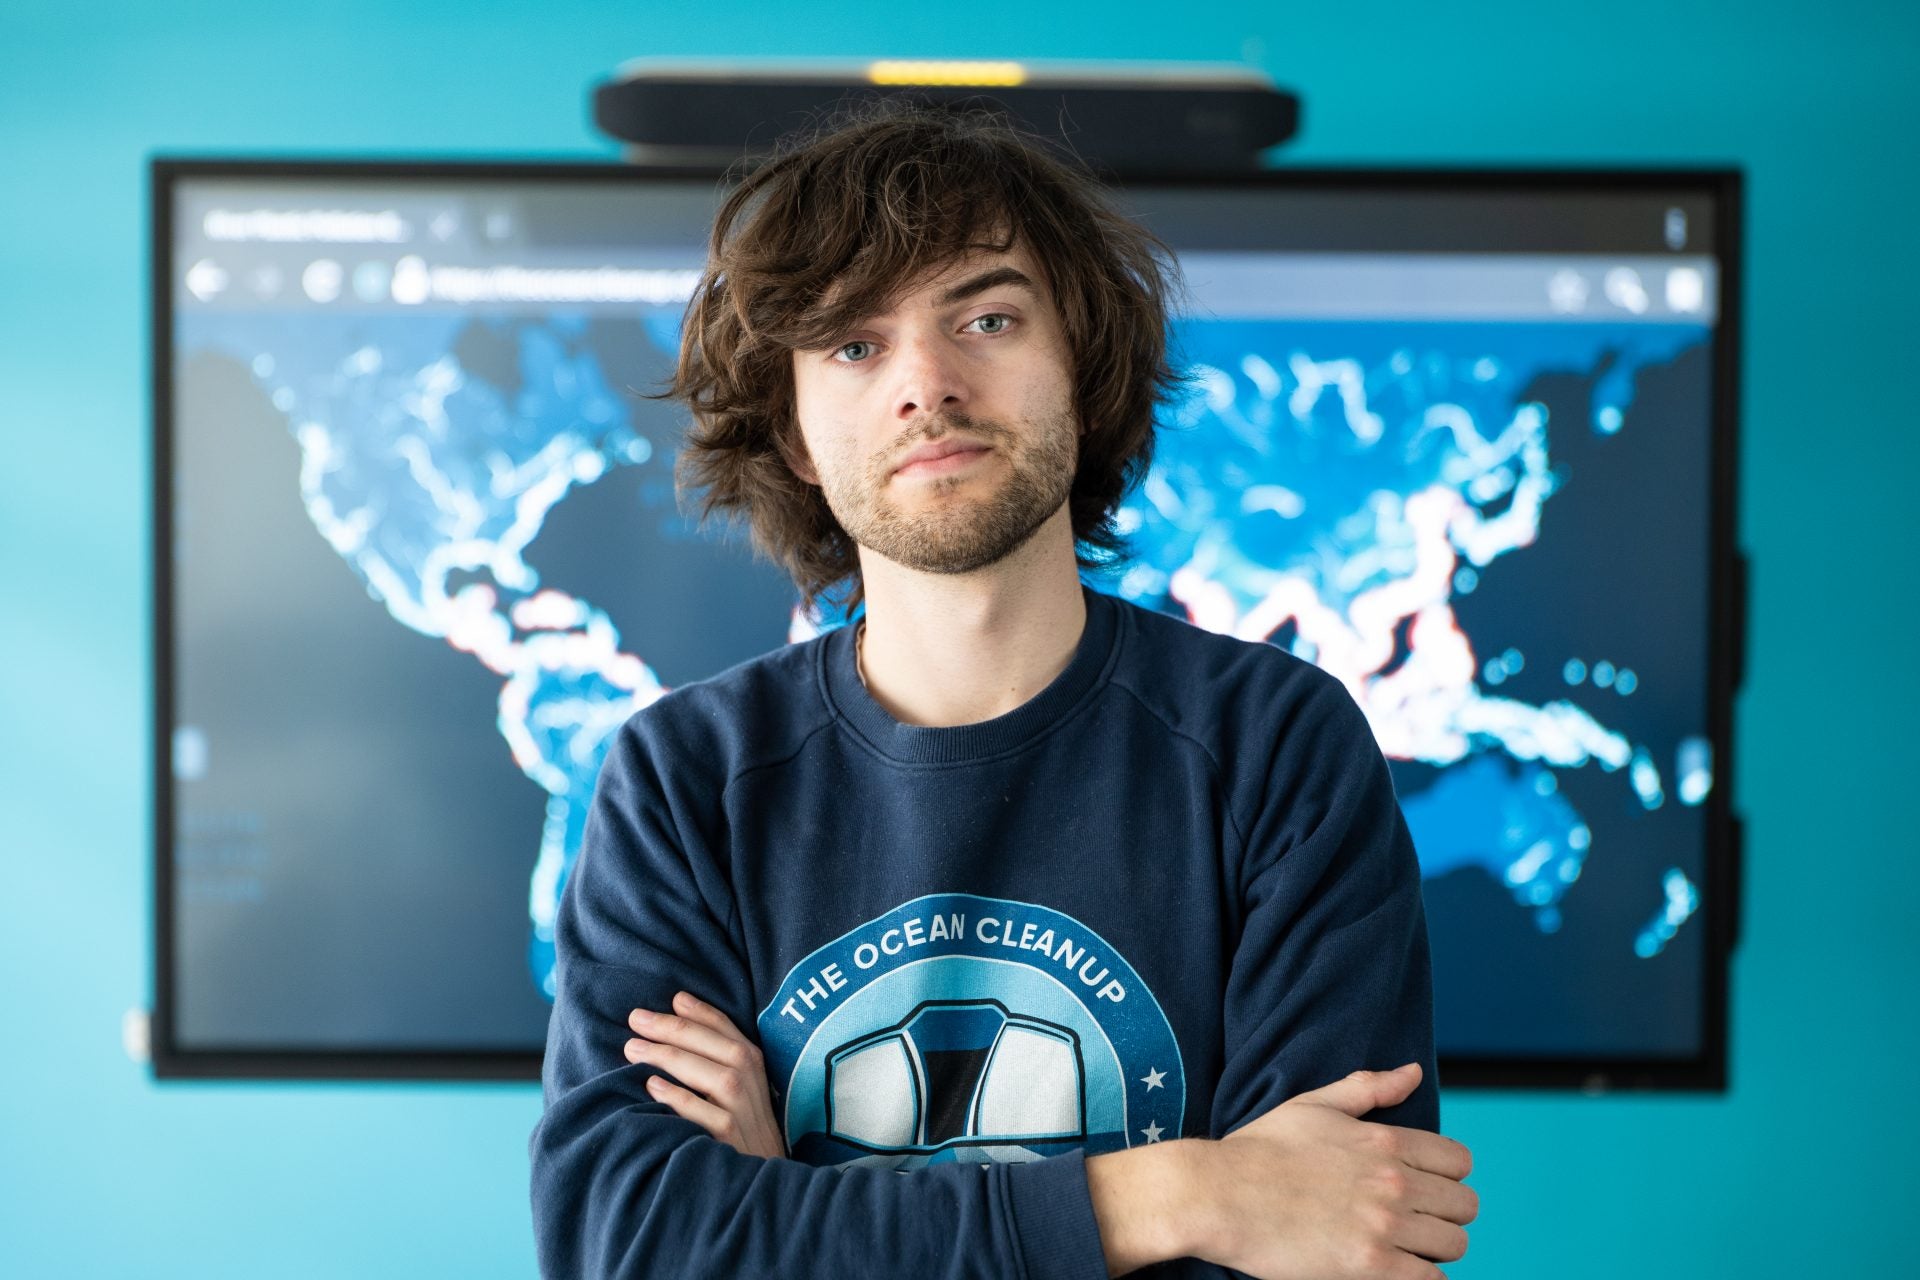 Dreaming of a plastic free Ocean: Boyan Slat and The Ocean Cleanup Project